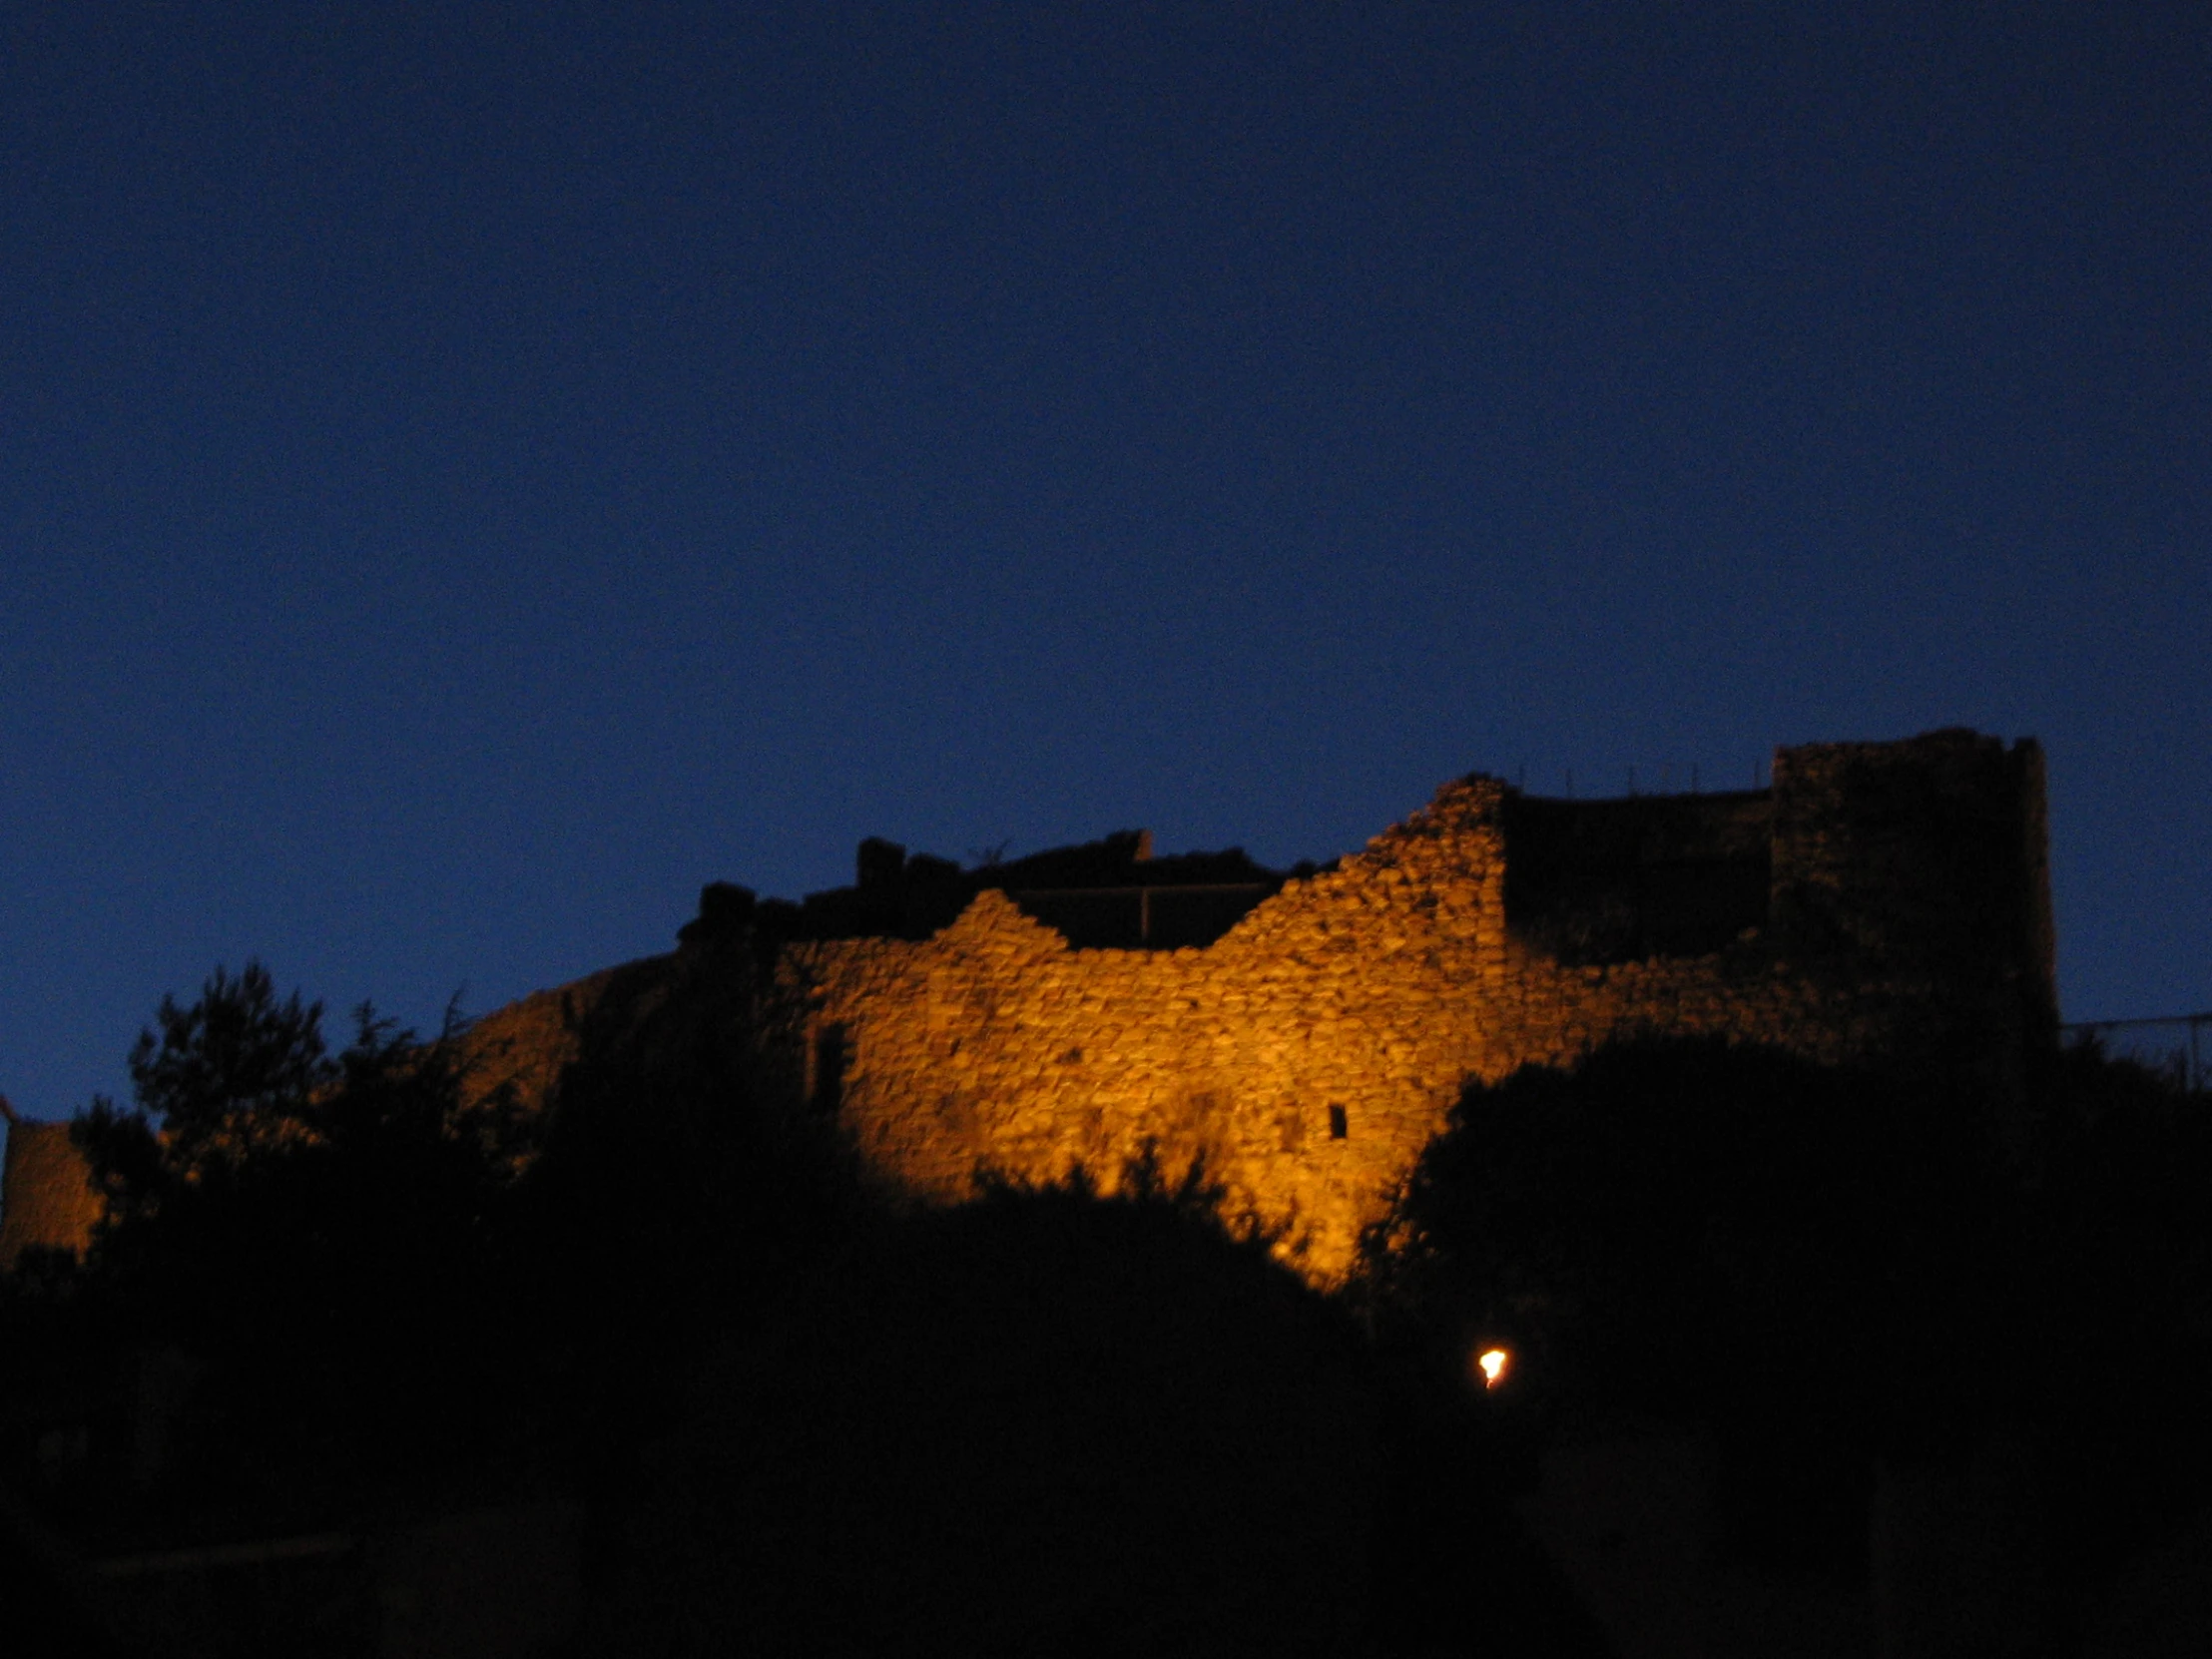 a castle with towers lit up at night